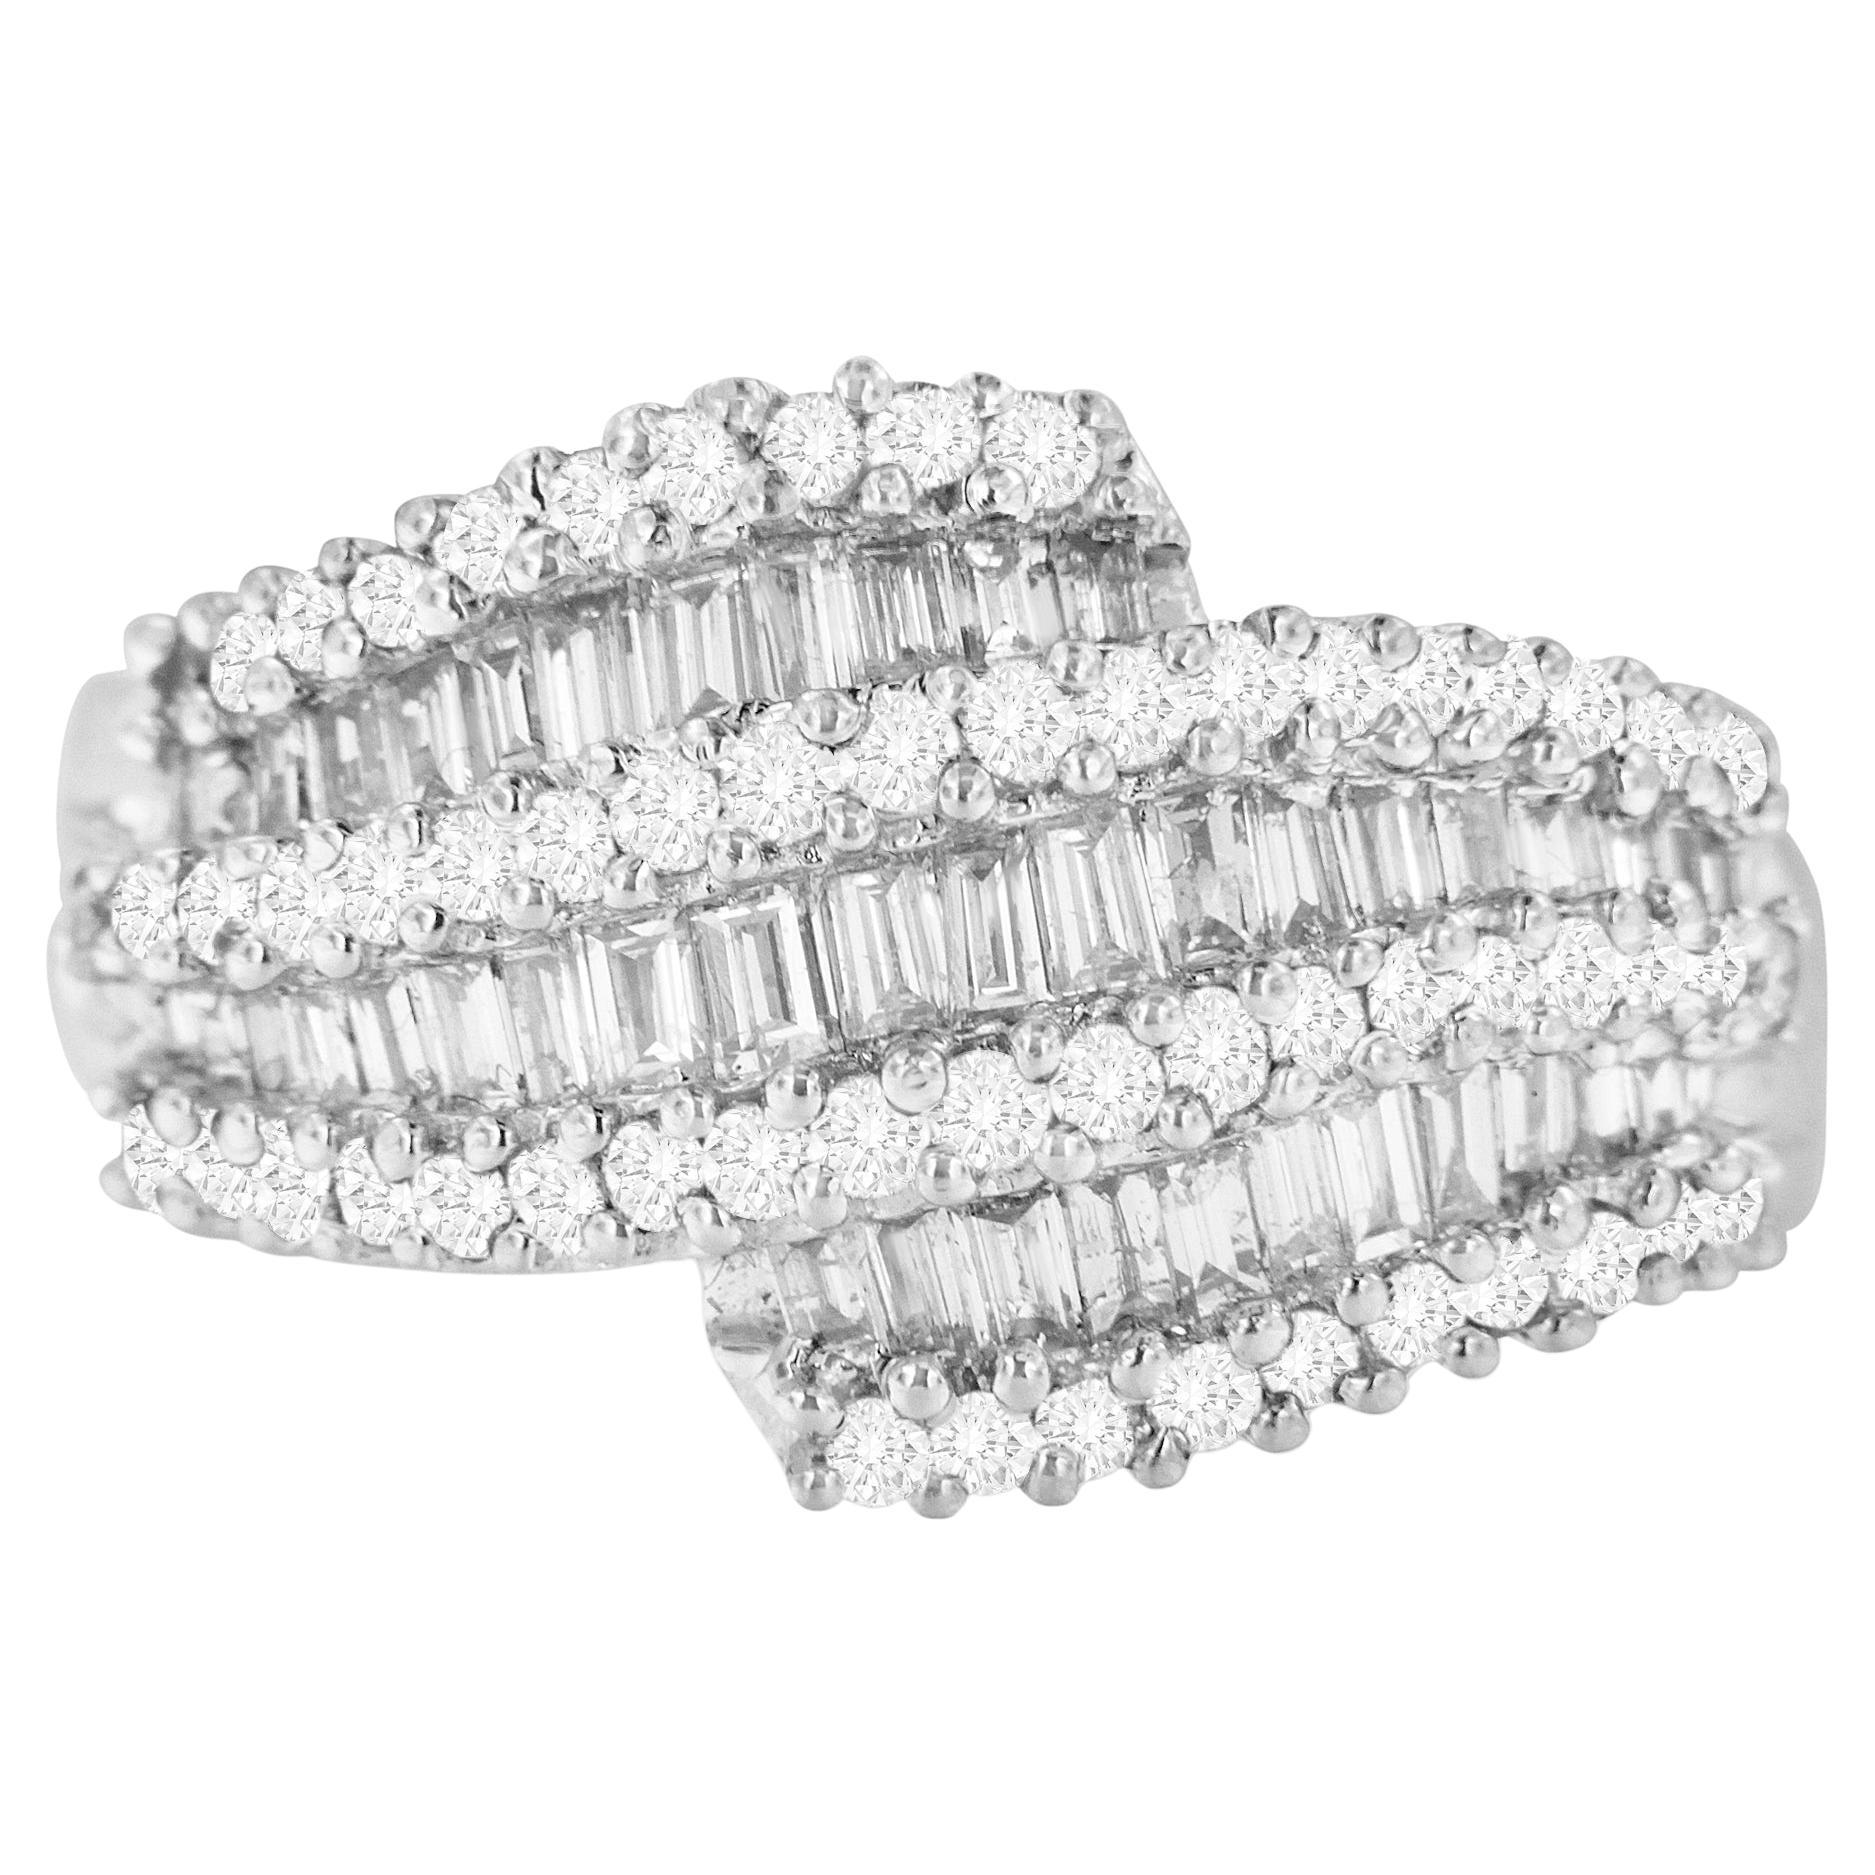 For Sale:  14K White Gold 1 3/4 Carat Diamond Cocktail Ring Band